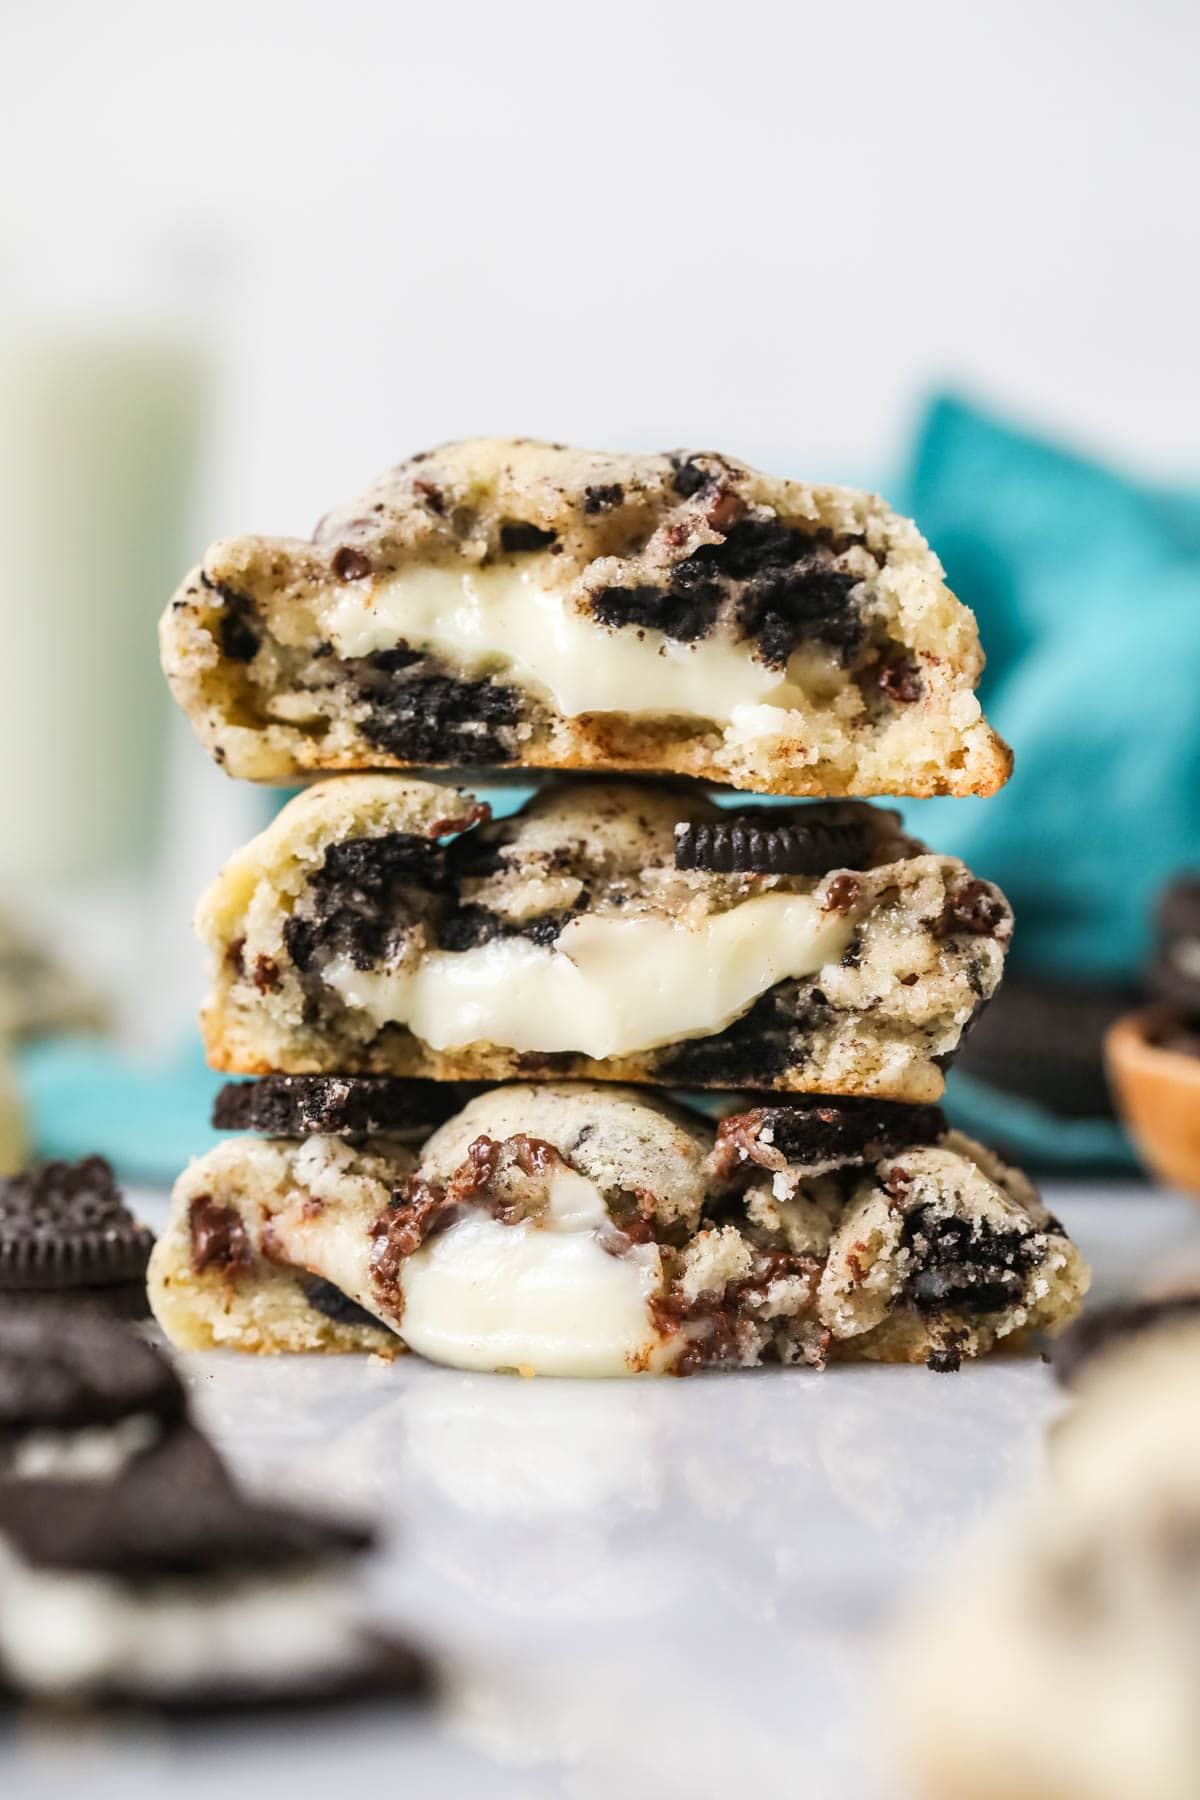 Three Oreo cheesecake cookies cut in half and stacked on top of each other.